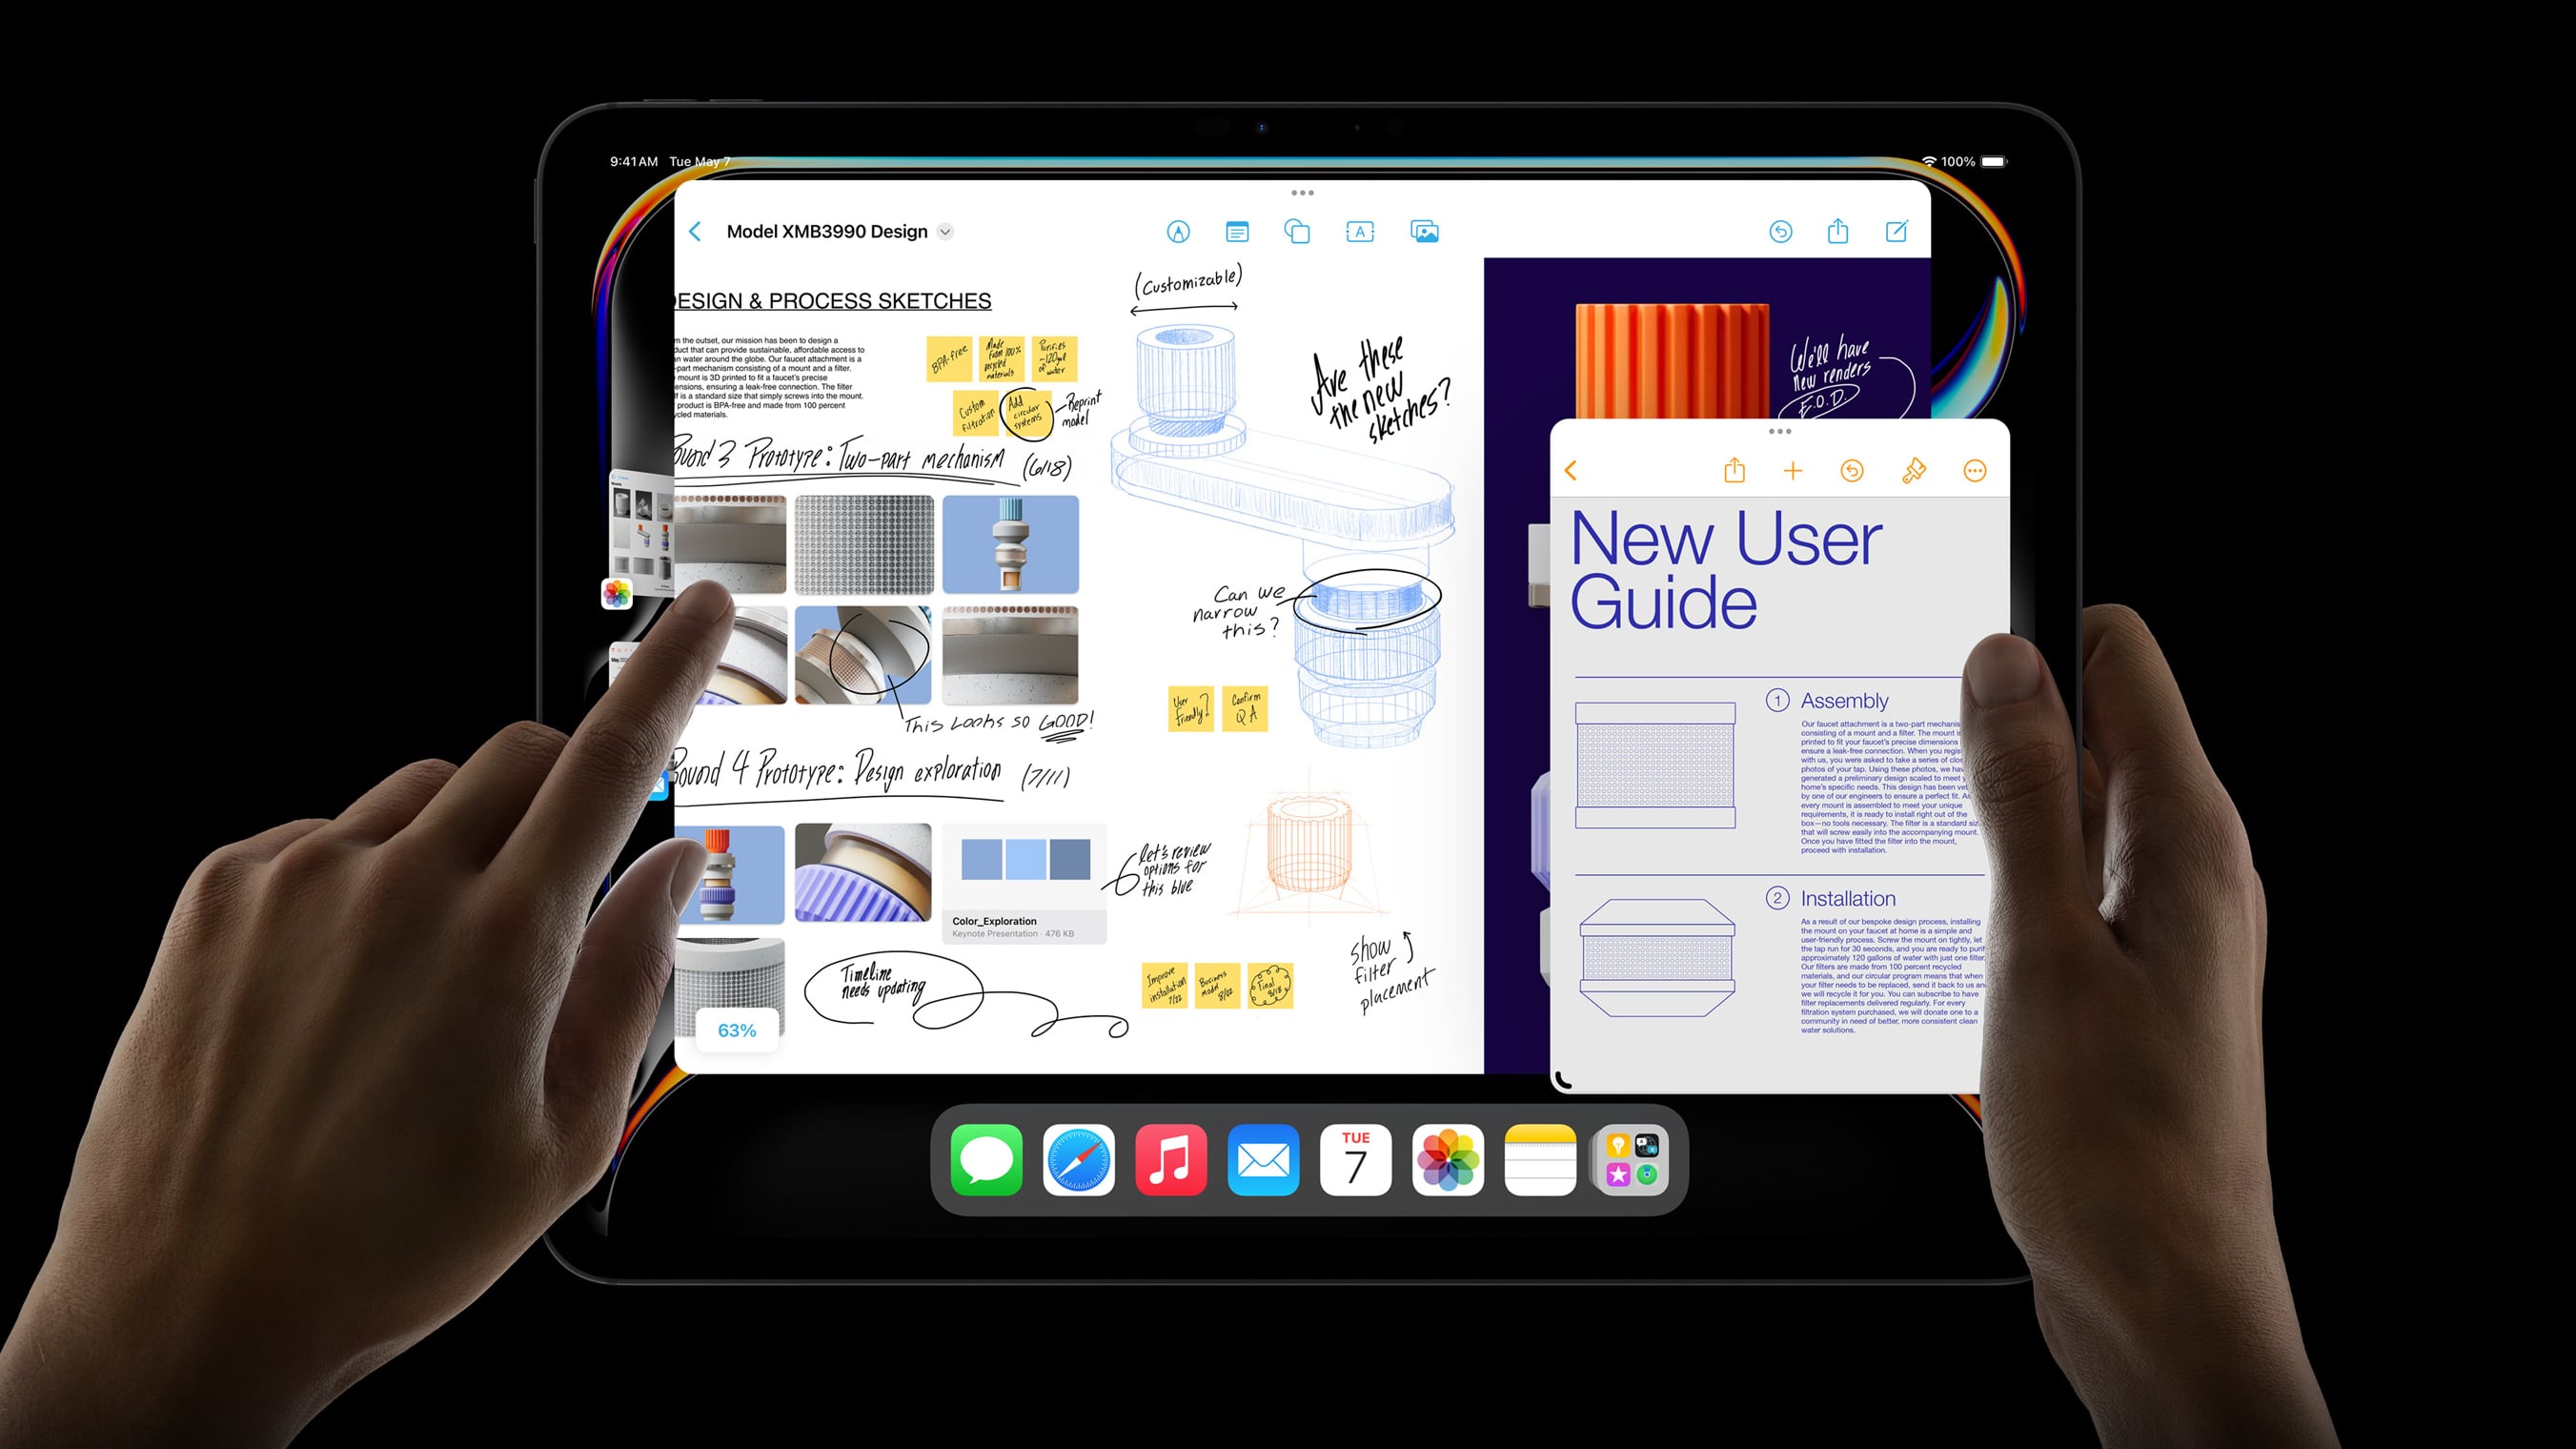 Here's Apple's Full iPad Lineup With New iPad Pro and iPad Air Models